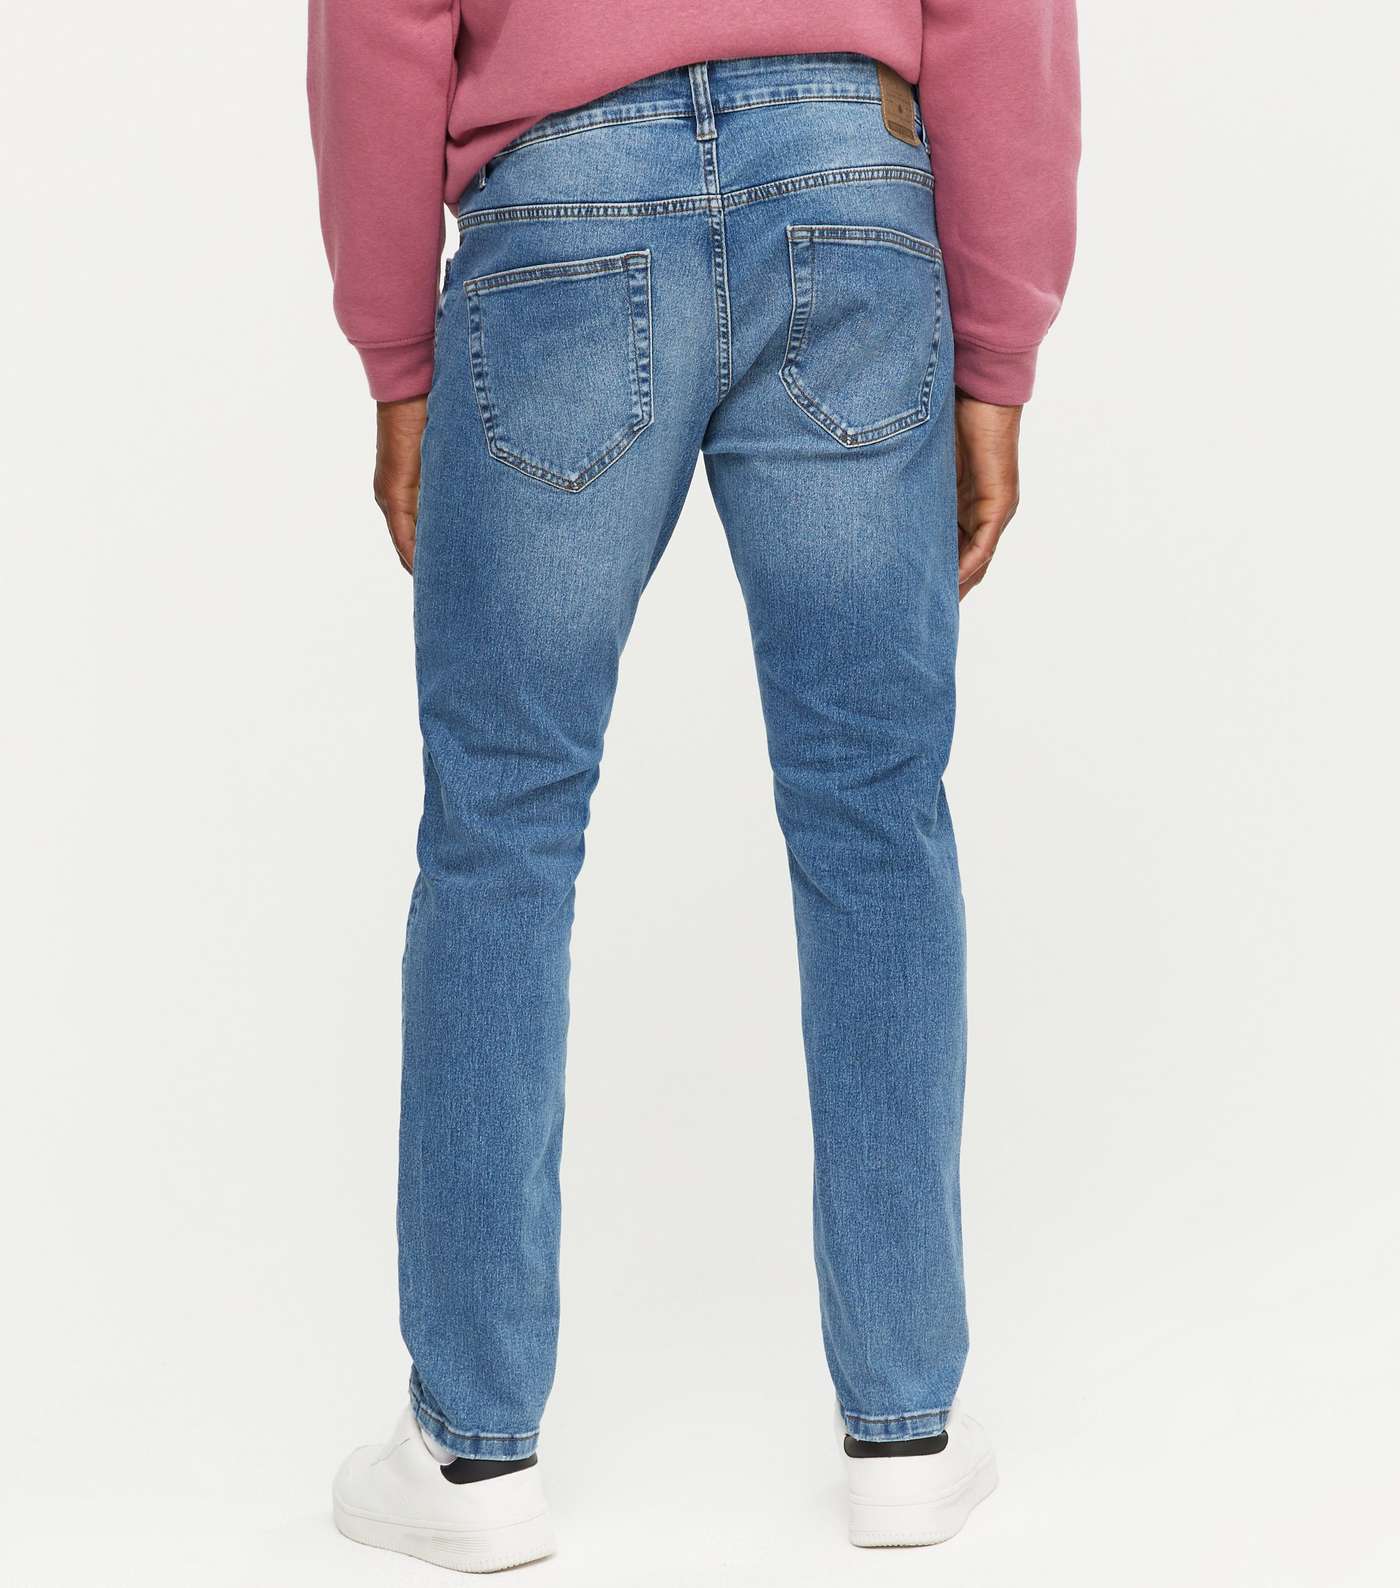 Only & Sons Blue Slim Fit Mid Wash Jeans Image 4